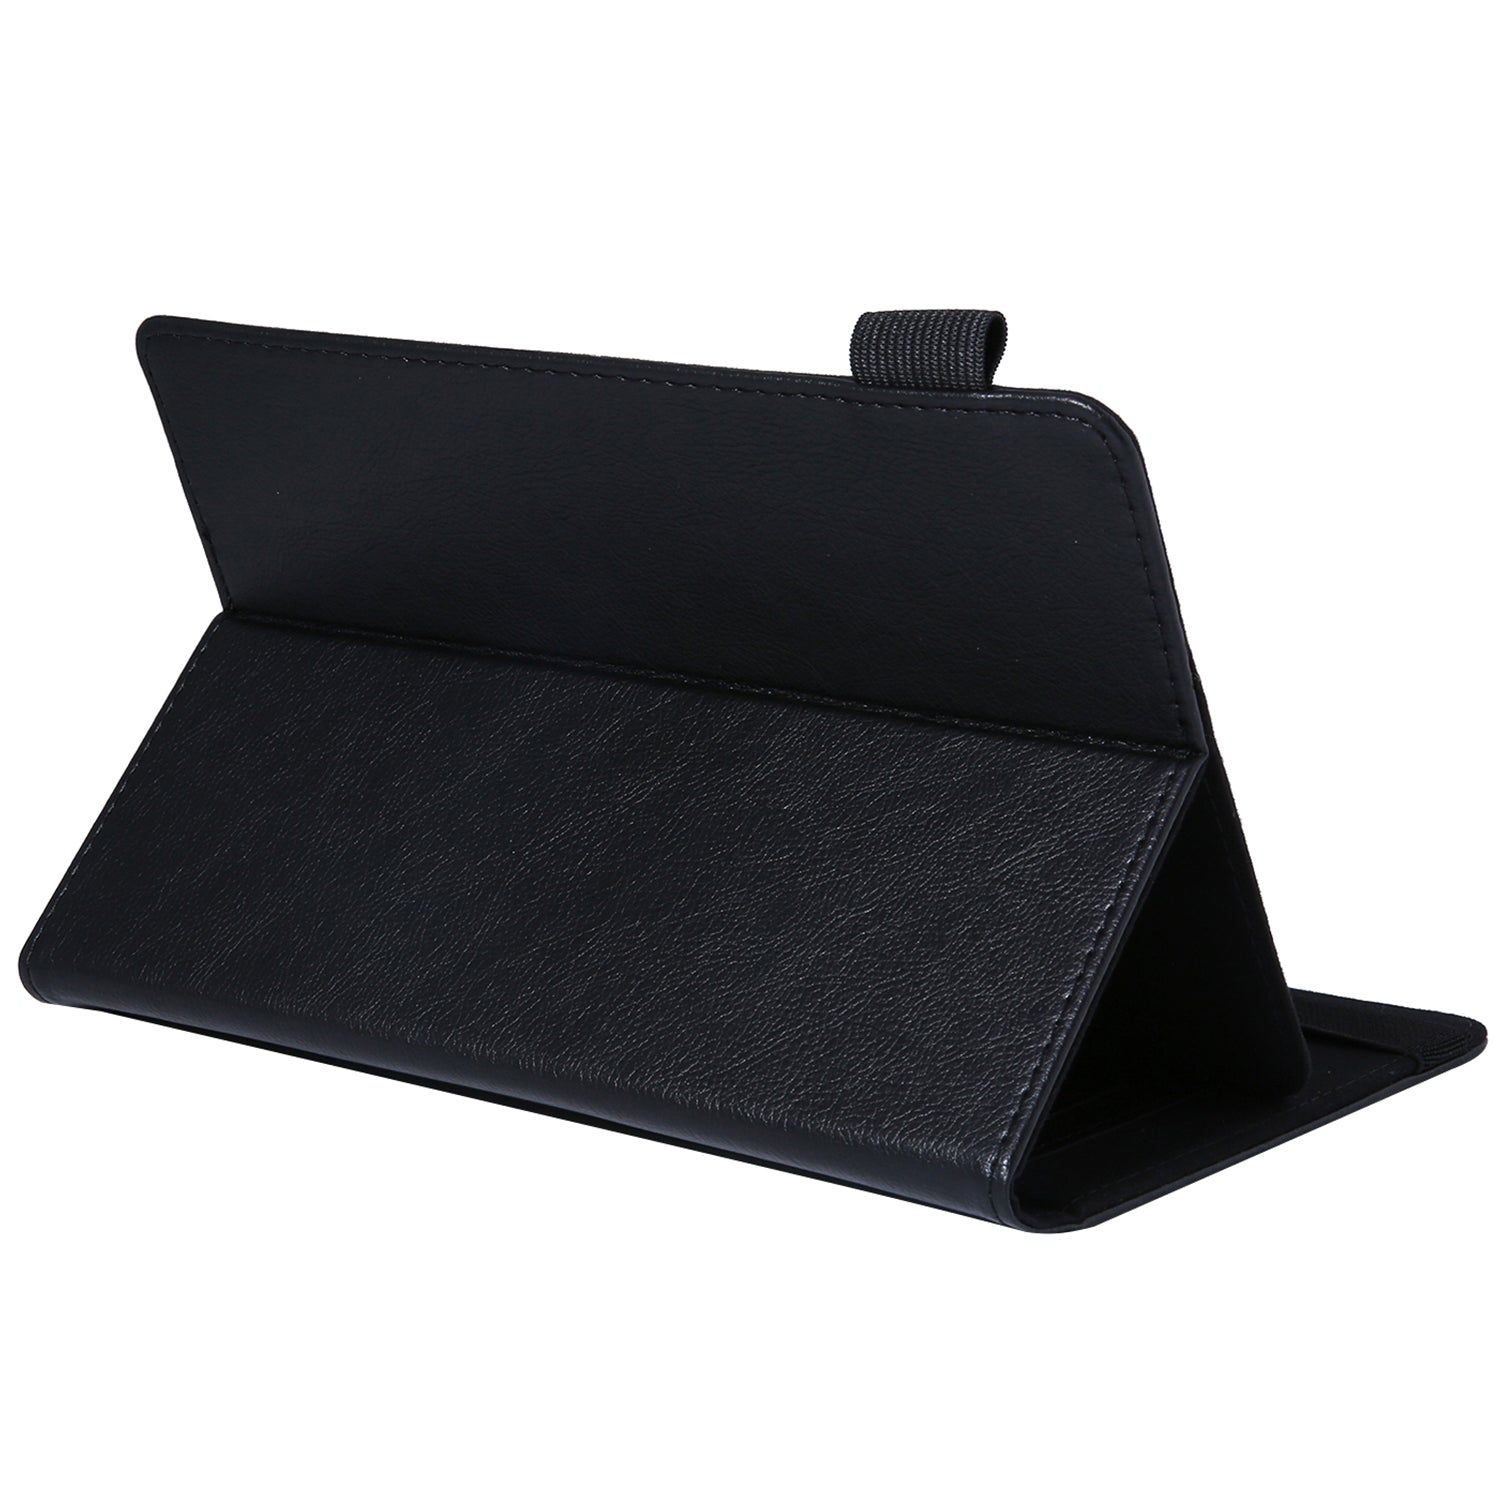 7-inch Tablet Leather Case Card Slots Stand Protective Cover - Black